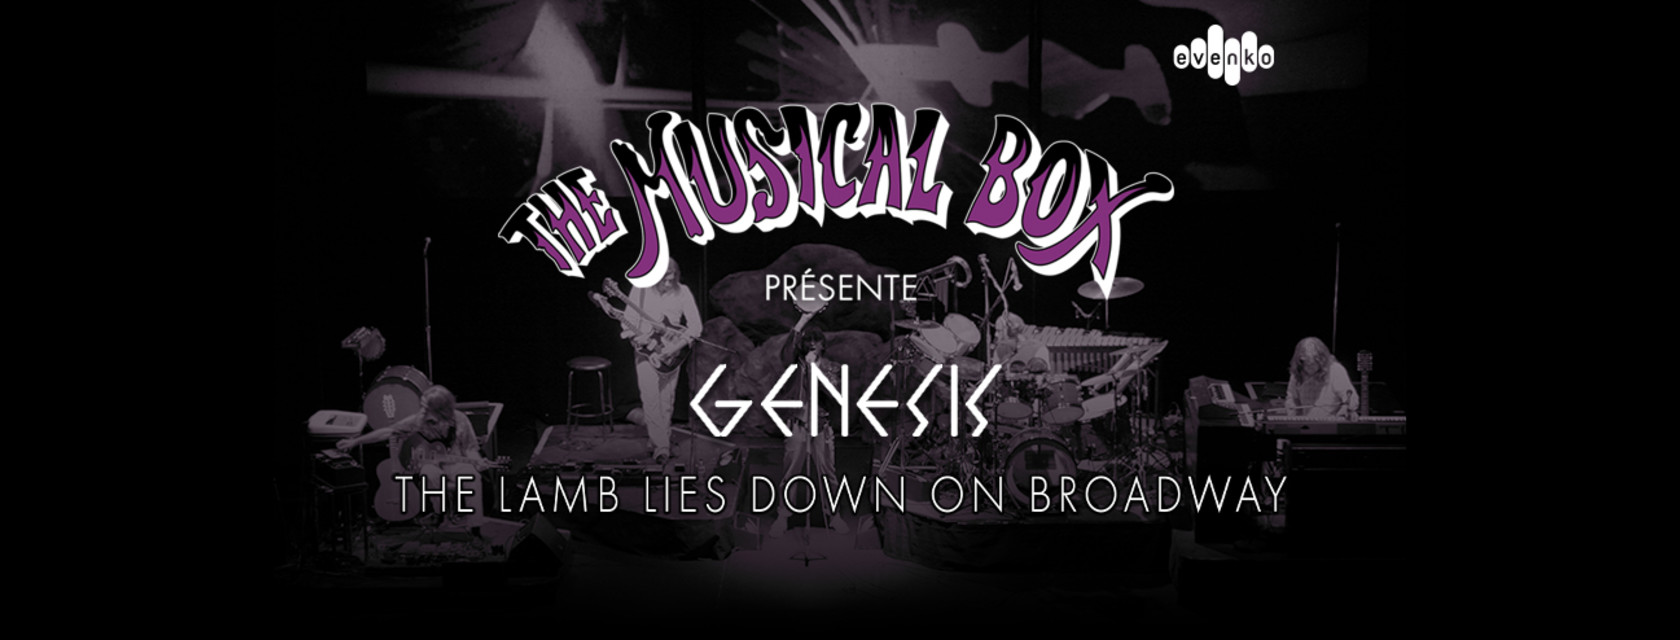 THE MUSICAL BOX will present for the last time in Canada The Lamb Lies Down On Broadway at the Cogeco Amphitheatre!